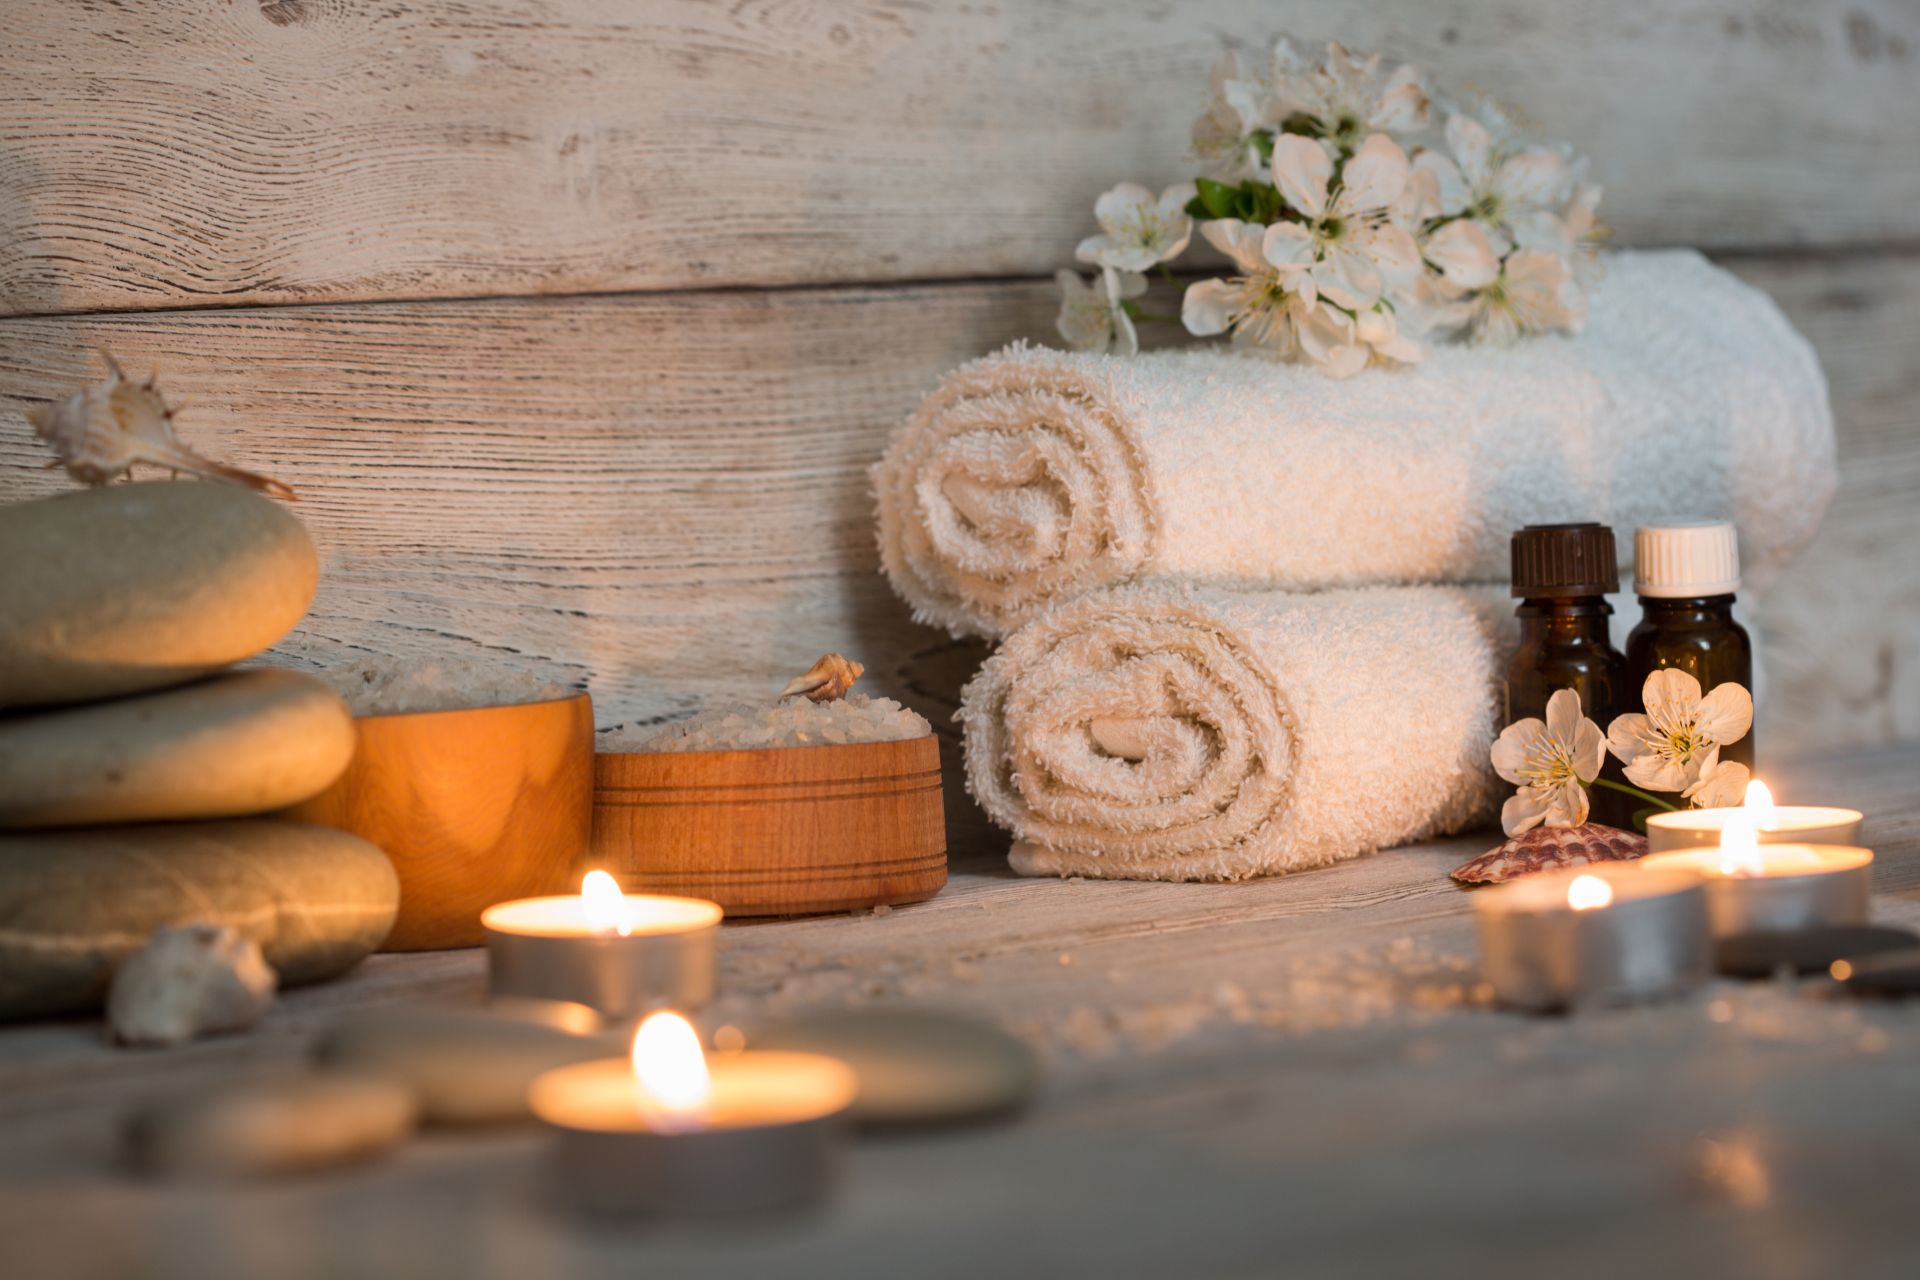 Candles, towels and aromatherapy oils set up for a spa treatment